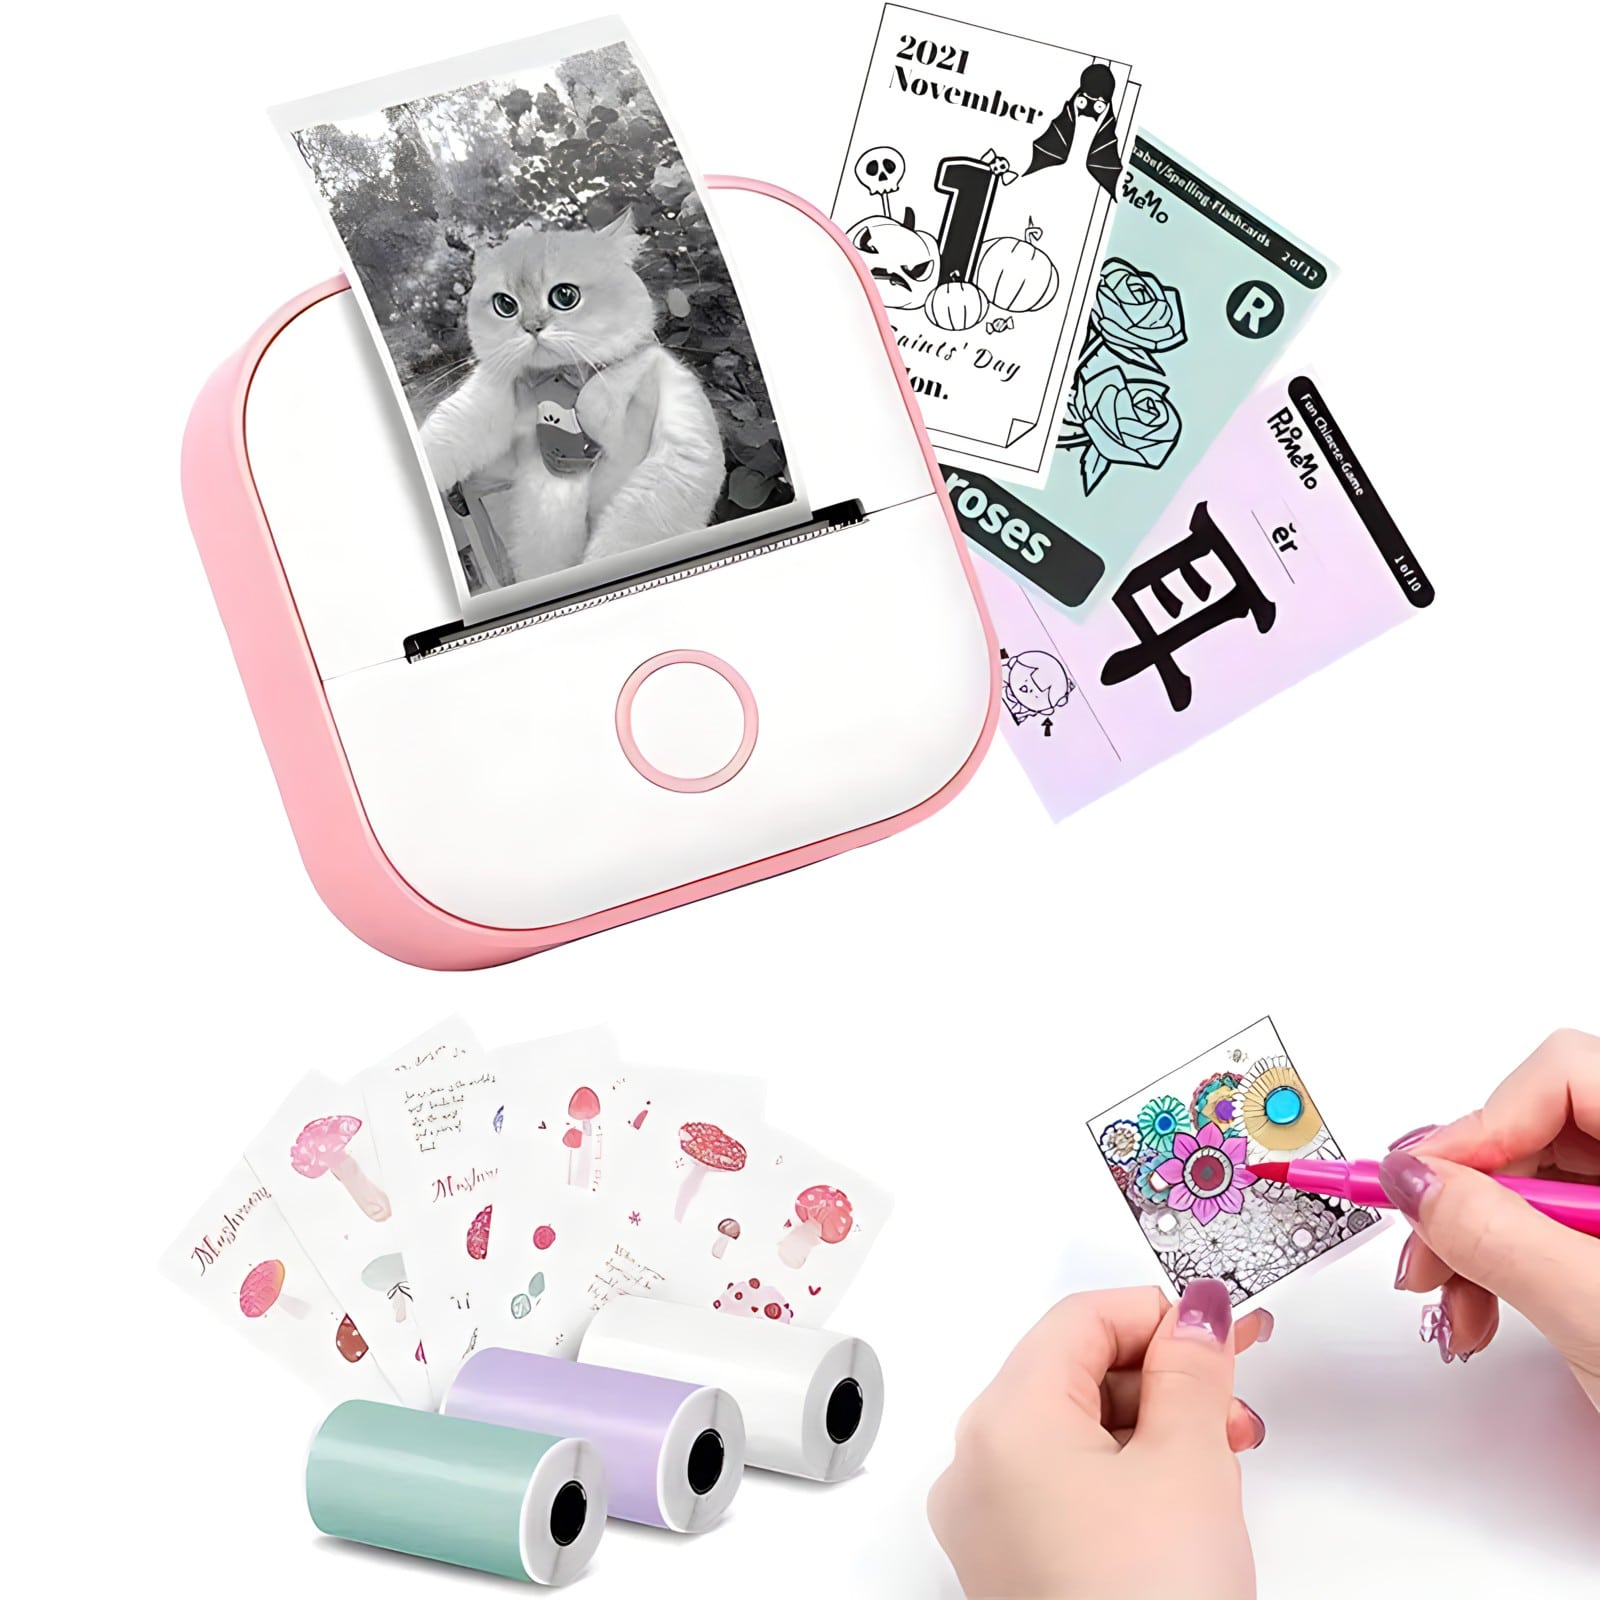 Portable Printer - Inkless & Smartphone Compatible - Pink